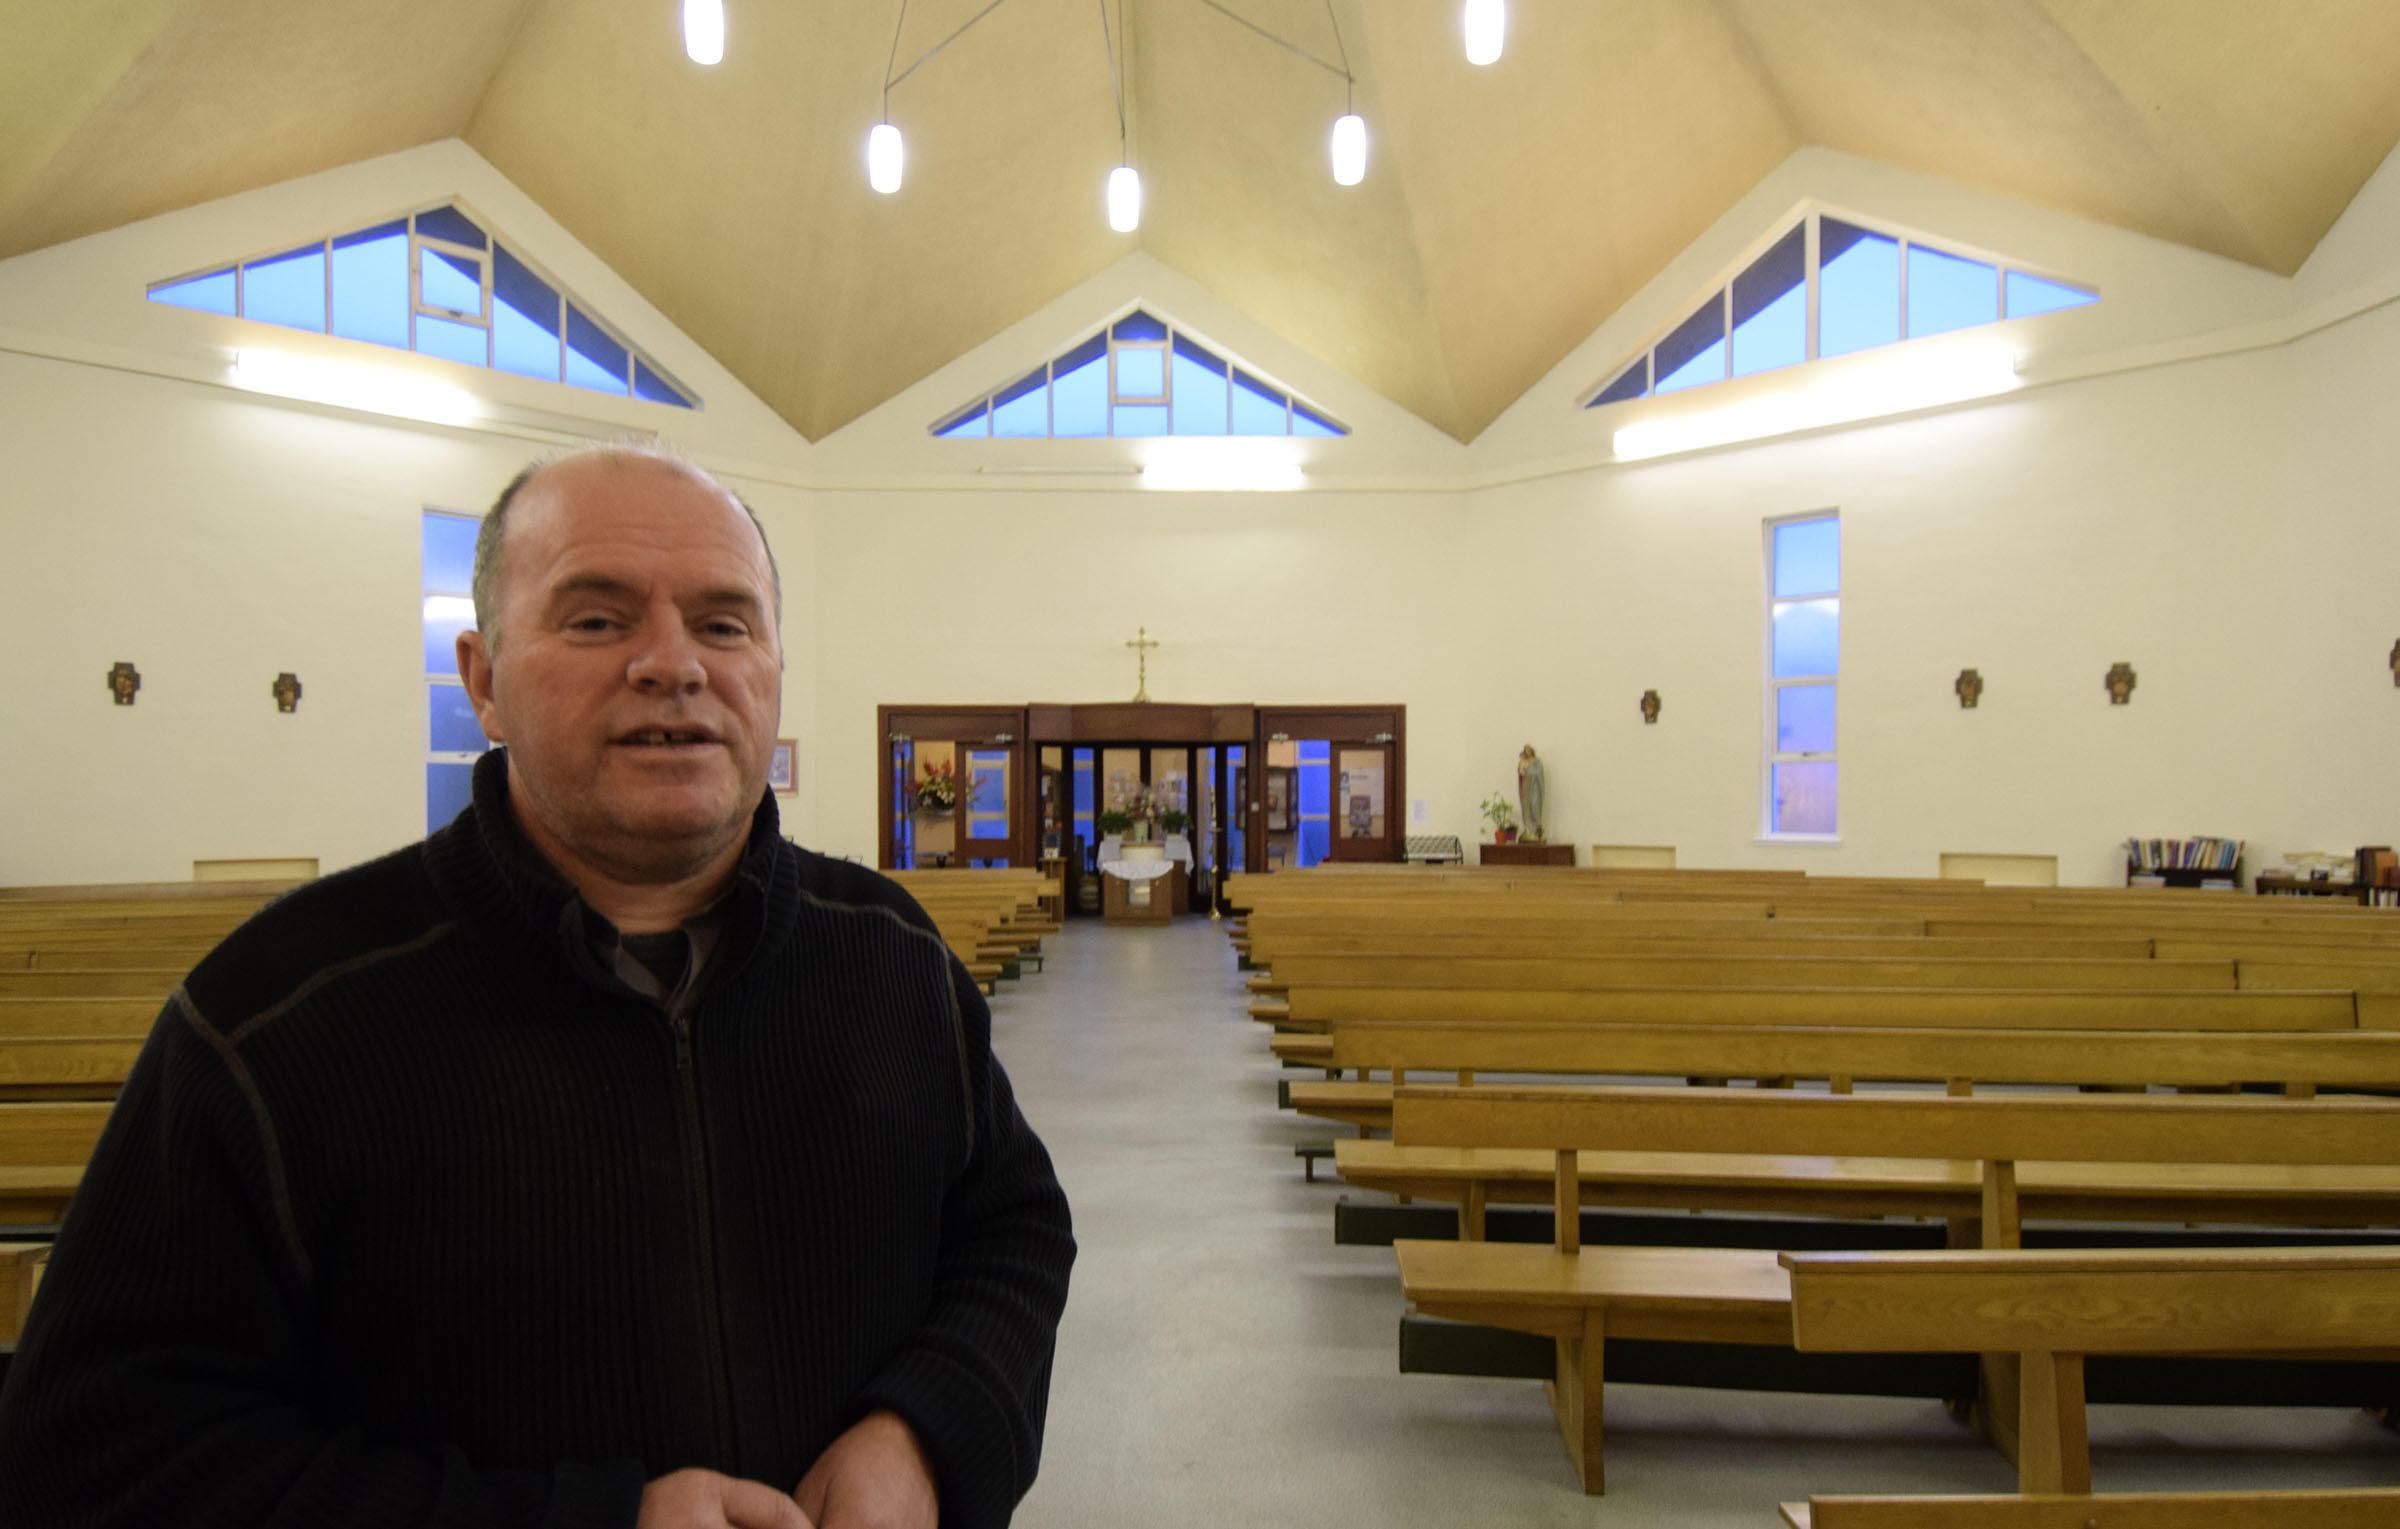 Father Roddy McAuley in the church where the new window will be installed above the door